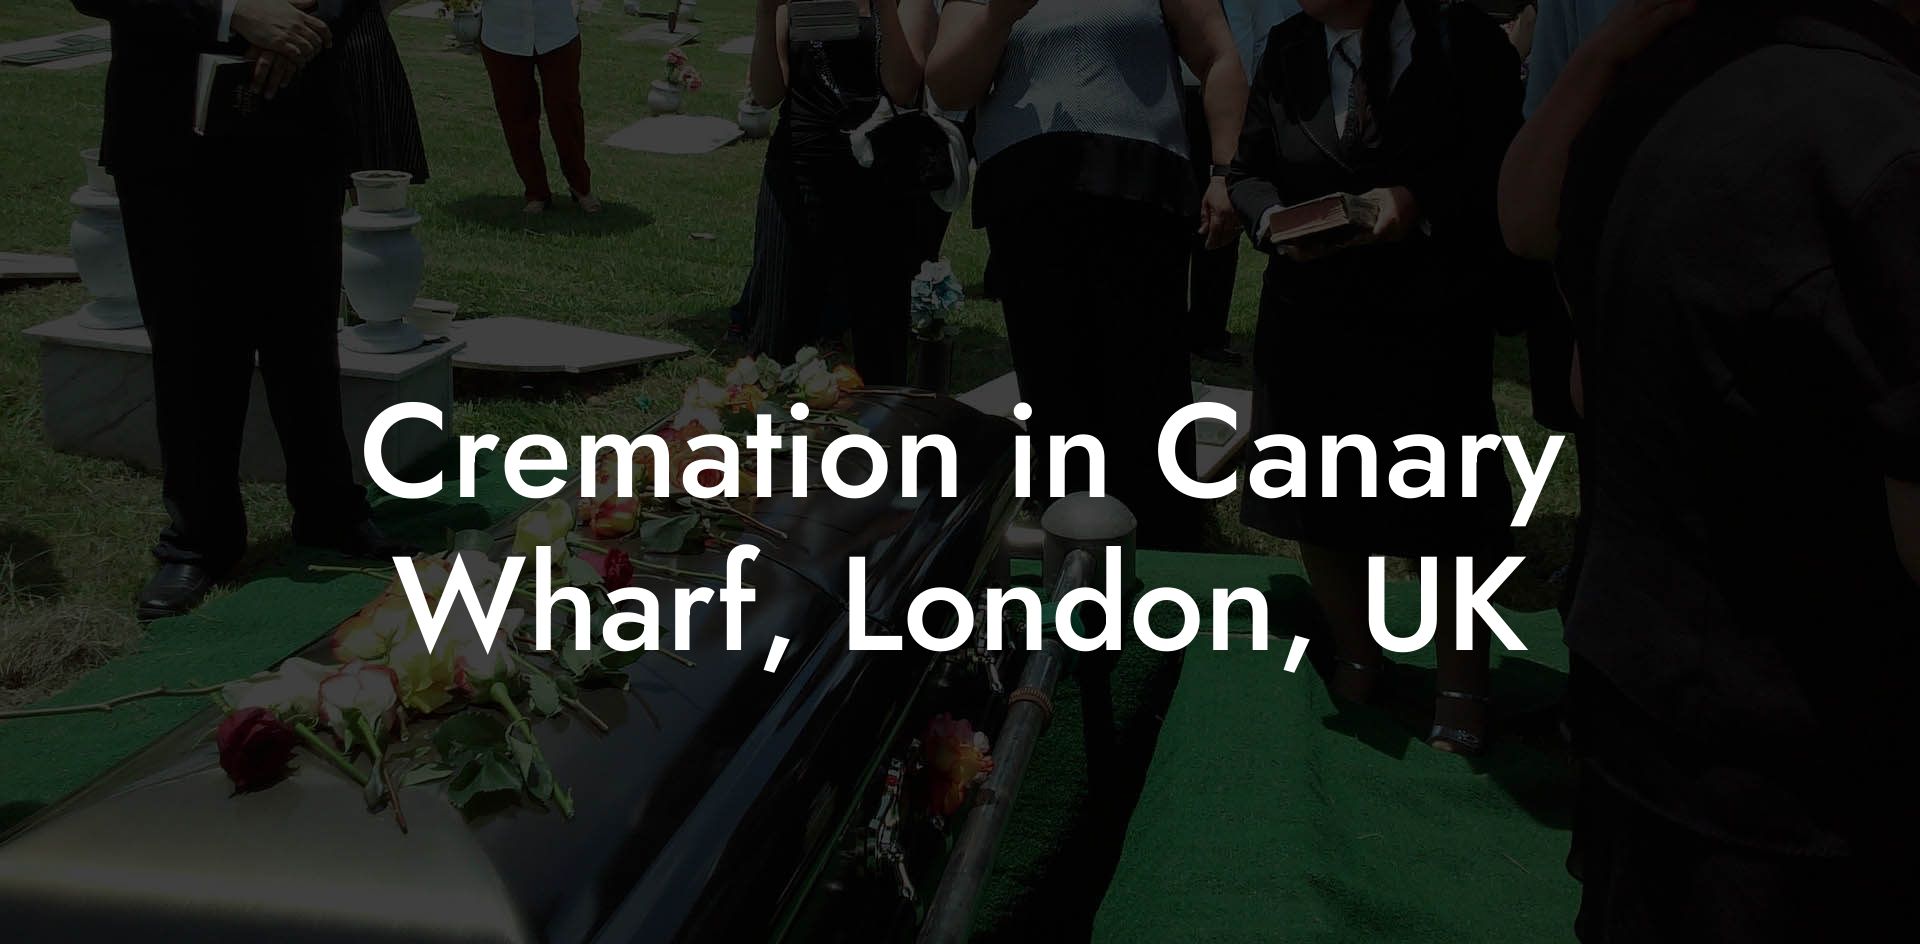 Cremation in Canary Wharf, London, UK